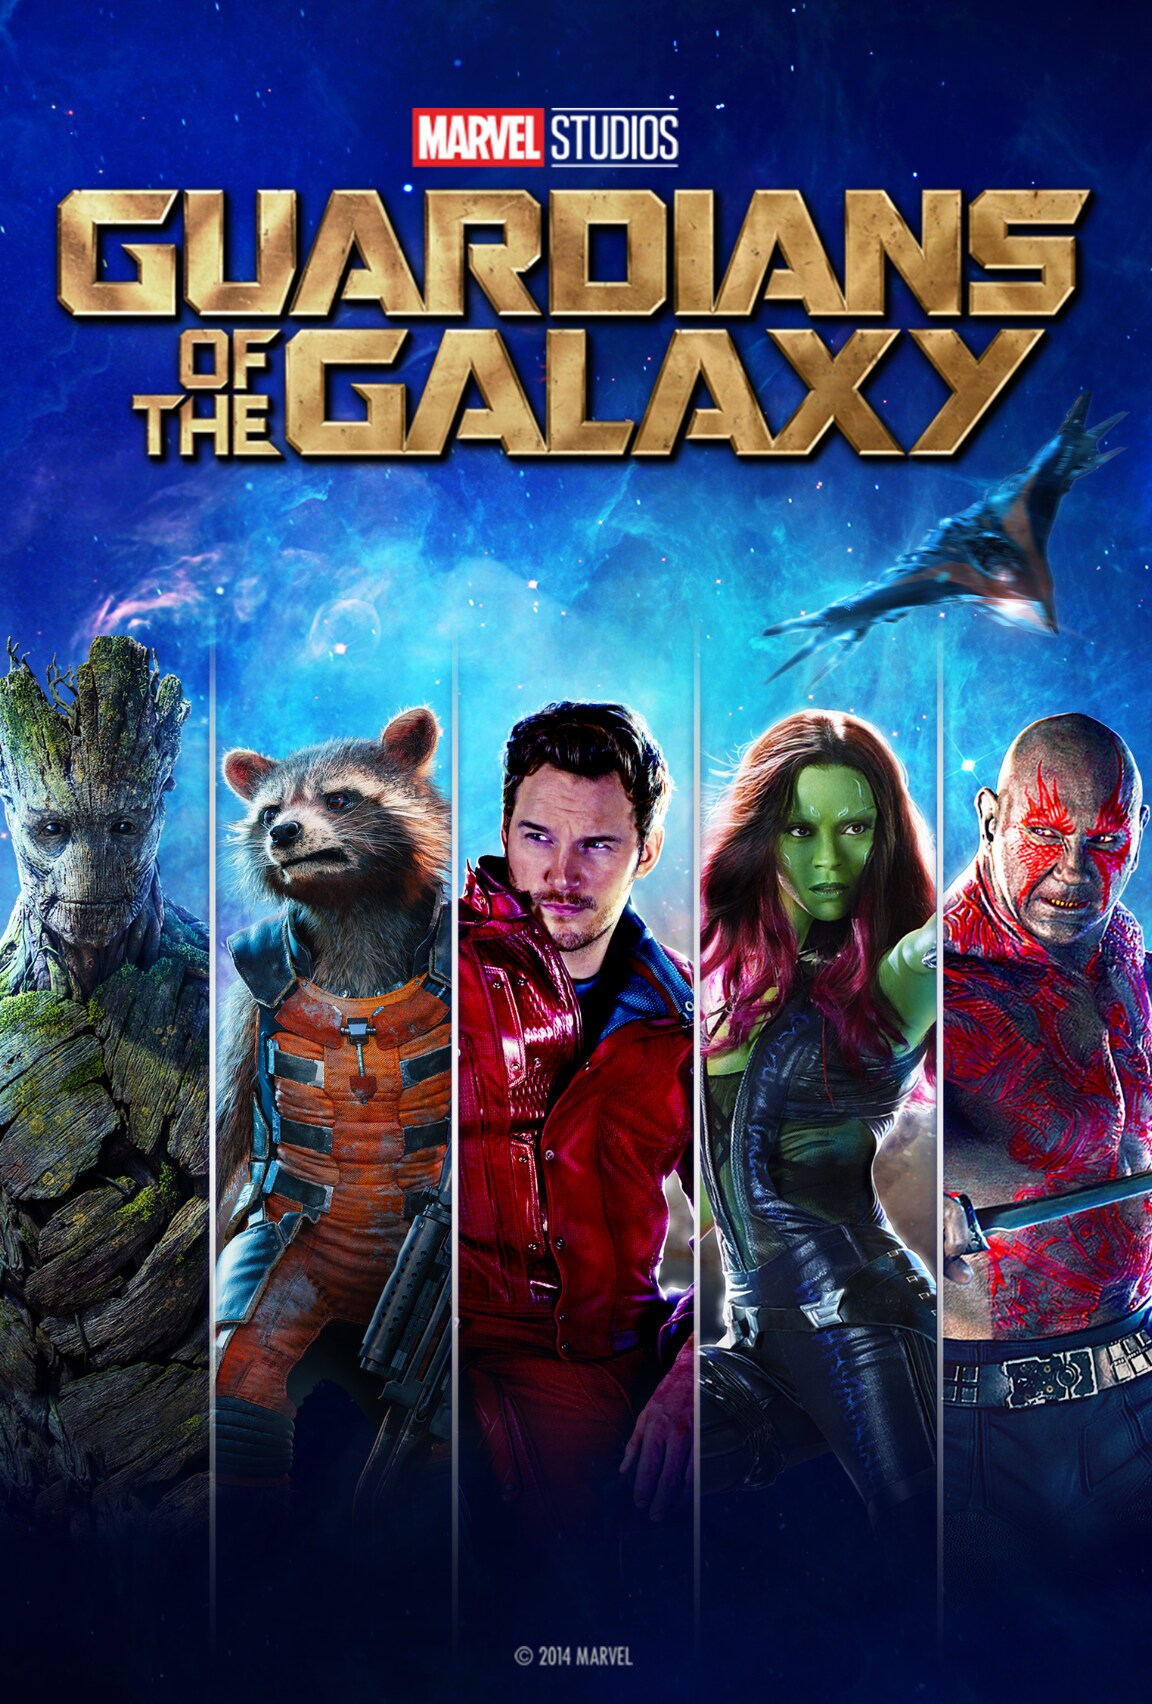 Guardians of the Galaxy on Disney+